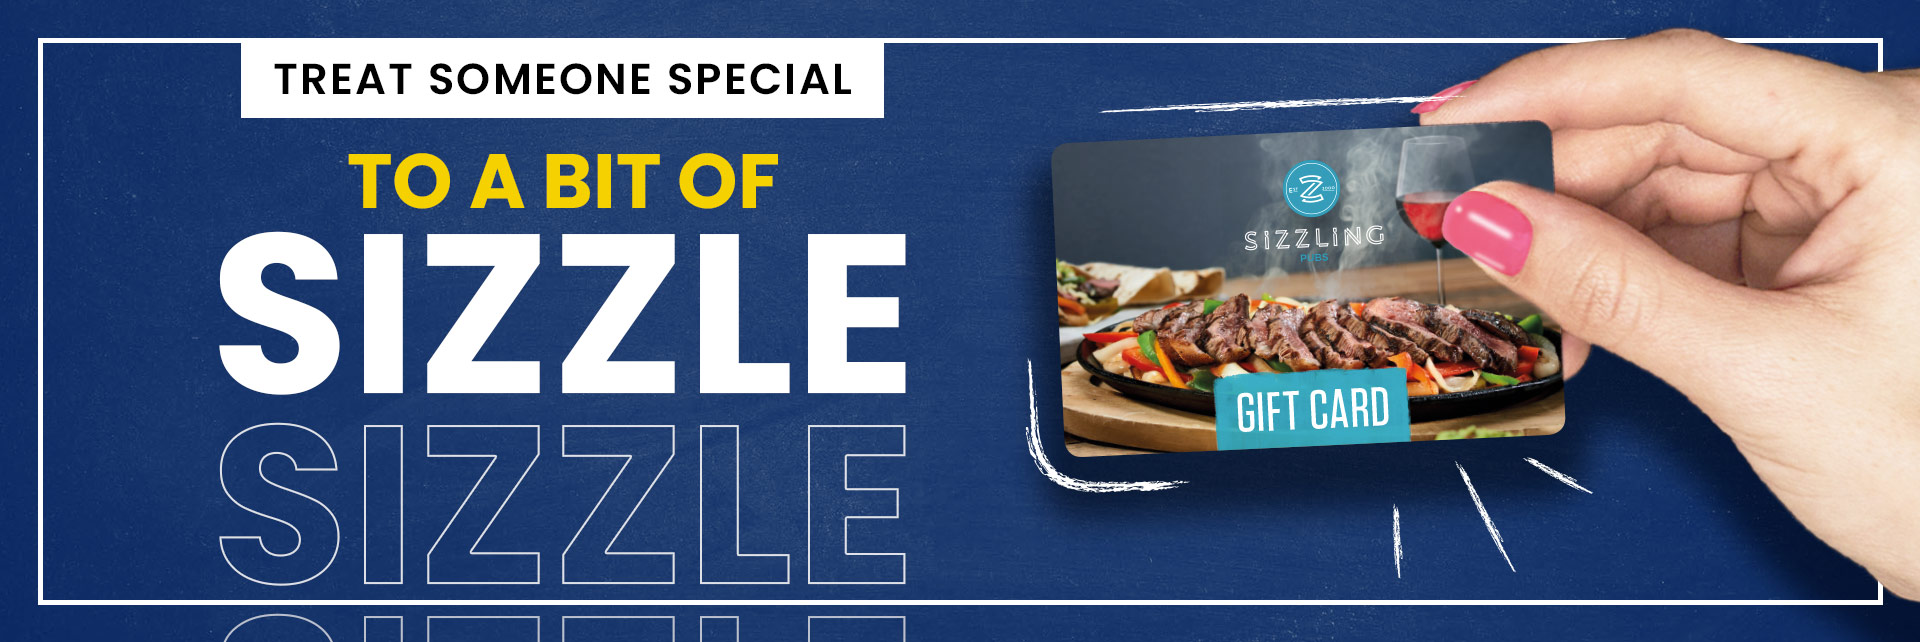 Sizzling Pubs Gift Card at The Merry Hill in Wolverhampton